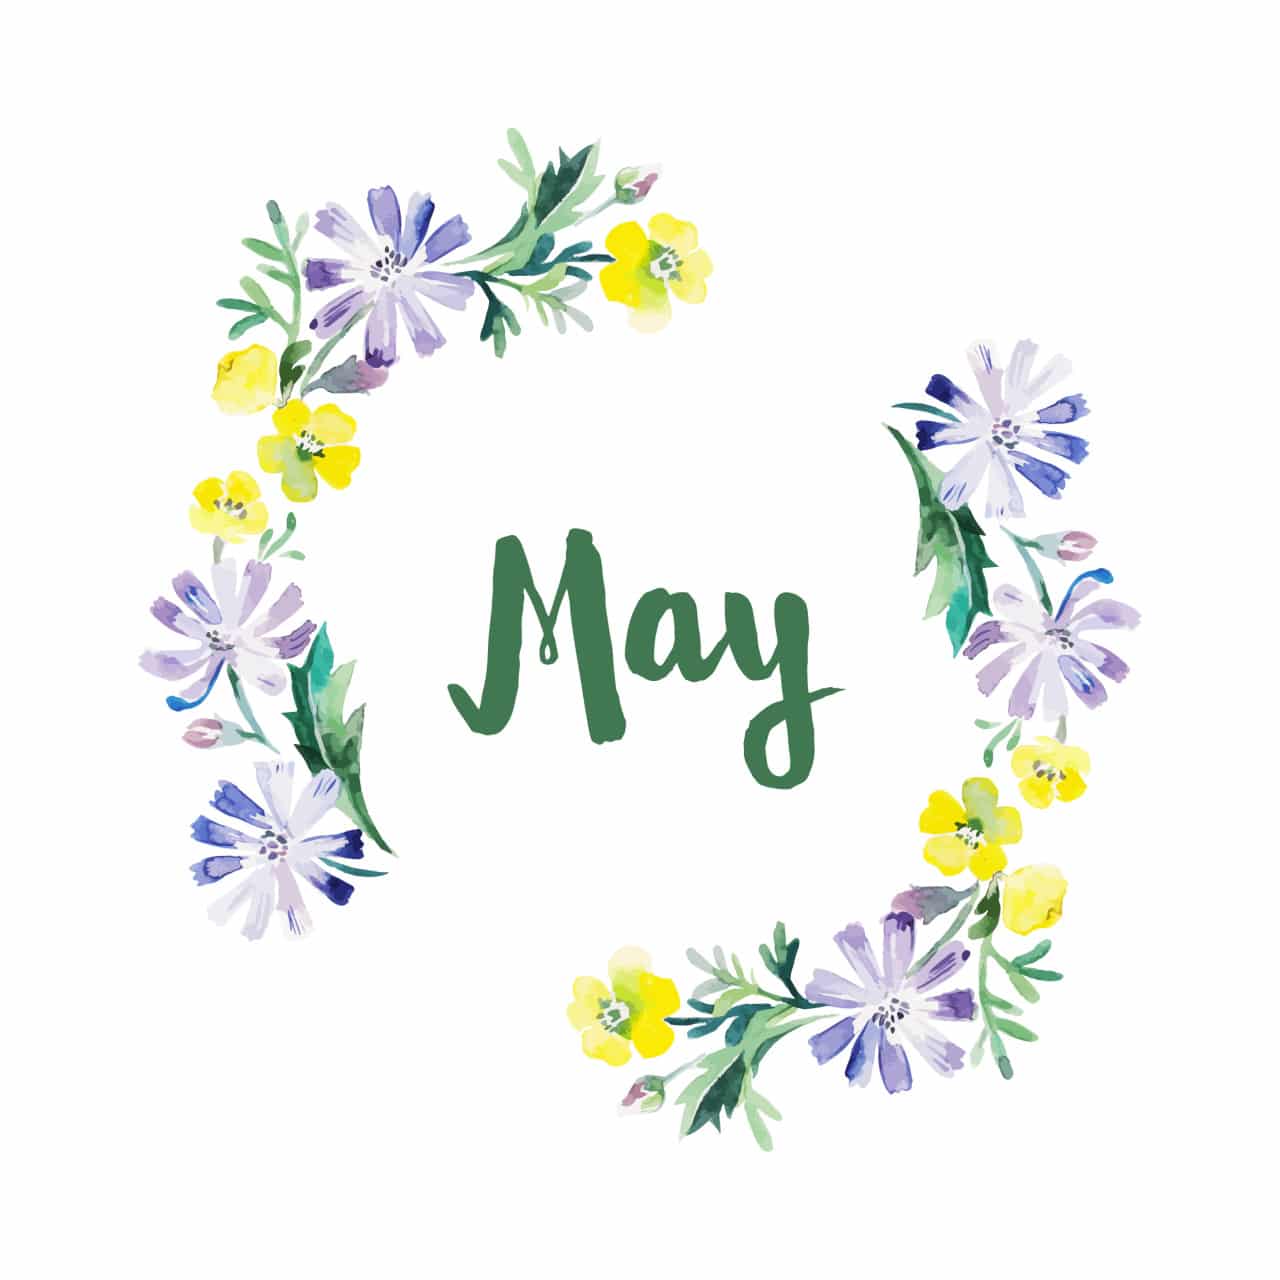 Welcome May Images